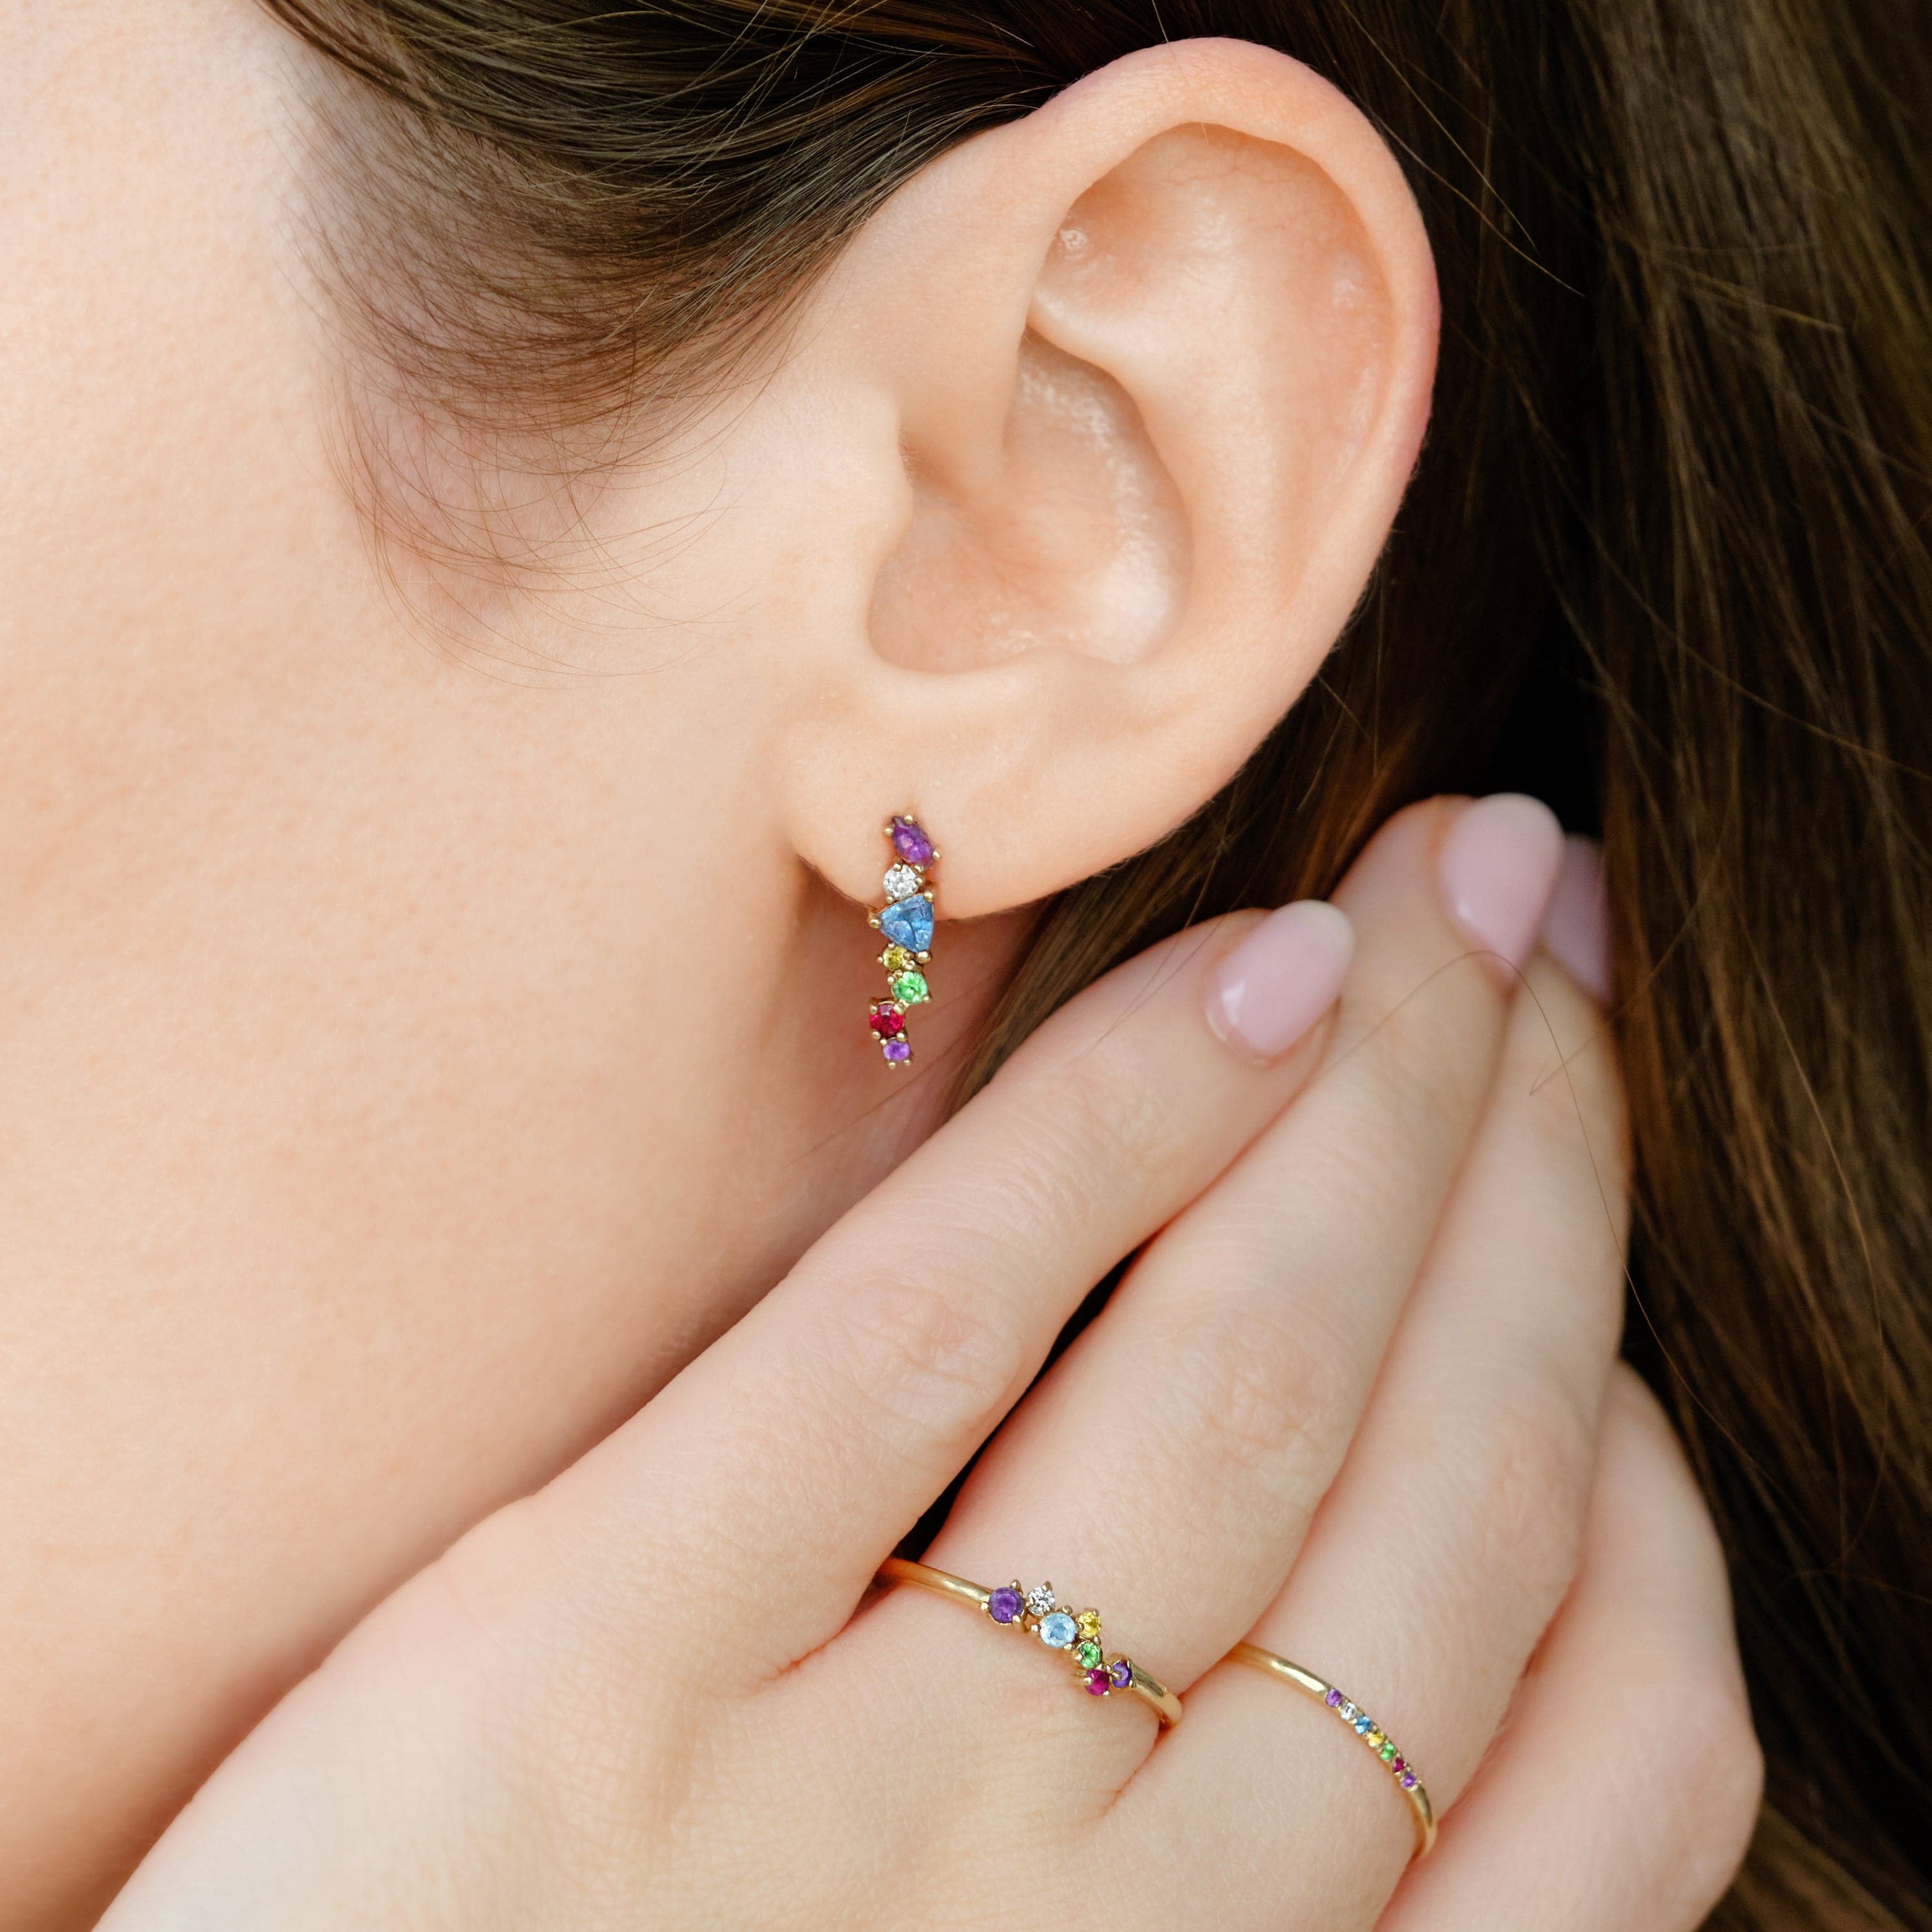 Ad Astra Rainbow Cluster Earrings 14k Solid Gold |  Earrings - Common Era Jewelry